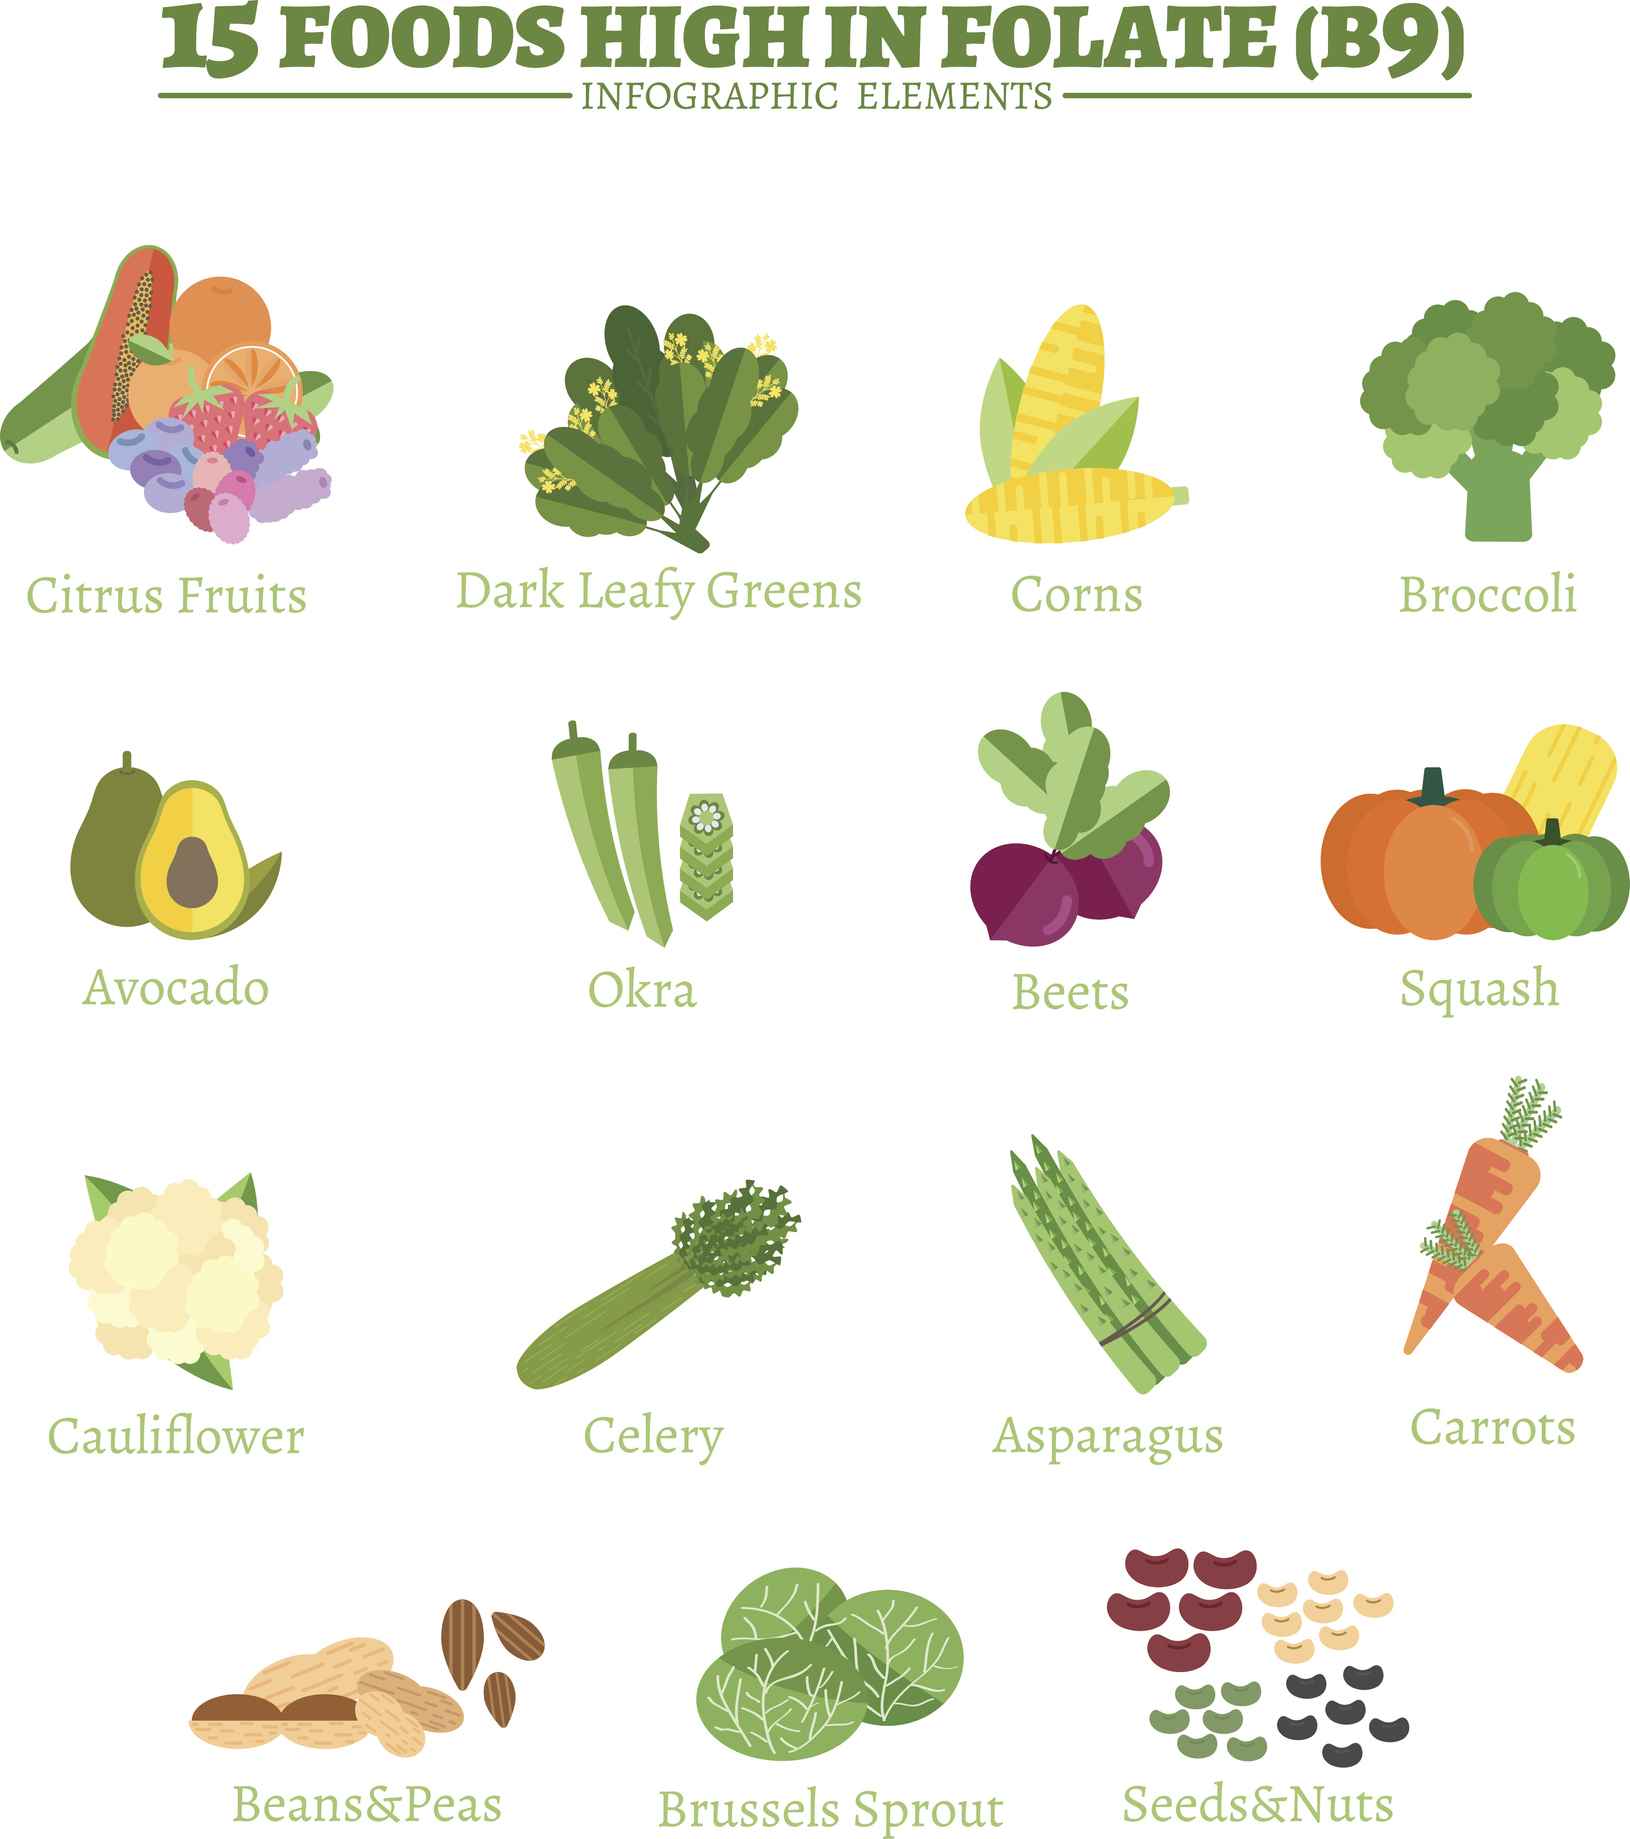 Important sources of vitamin B9 include citrus fruits, dark green leafy vegetables, corn, broccoli, avocado, okra, beetroot, beetroot juice, cauliflower, celery, asparagus, carrots, beans and peas, Brussels sprouts, seeds and nuts. 